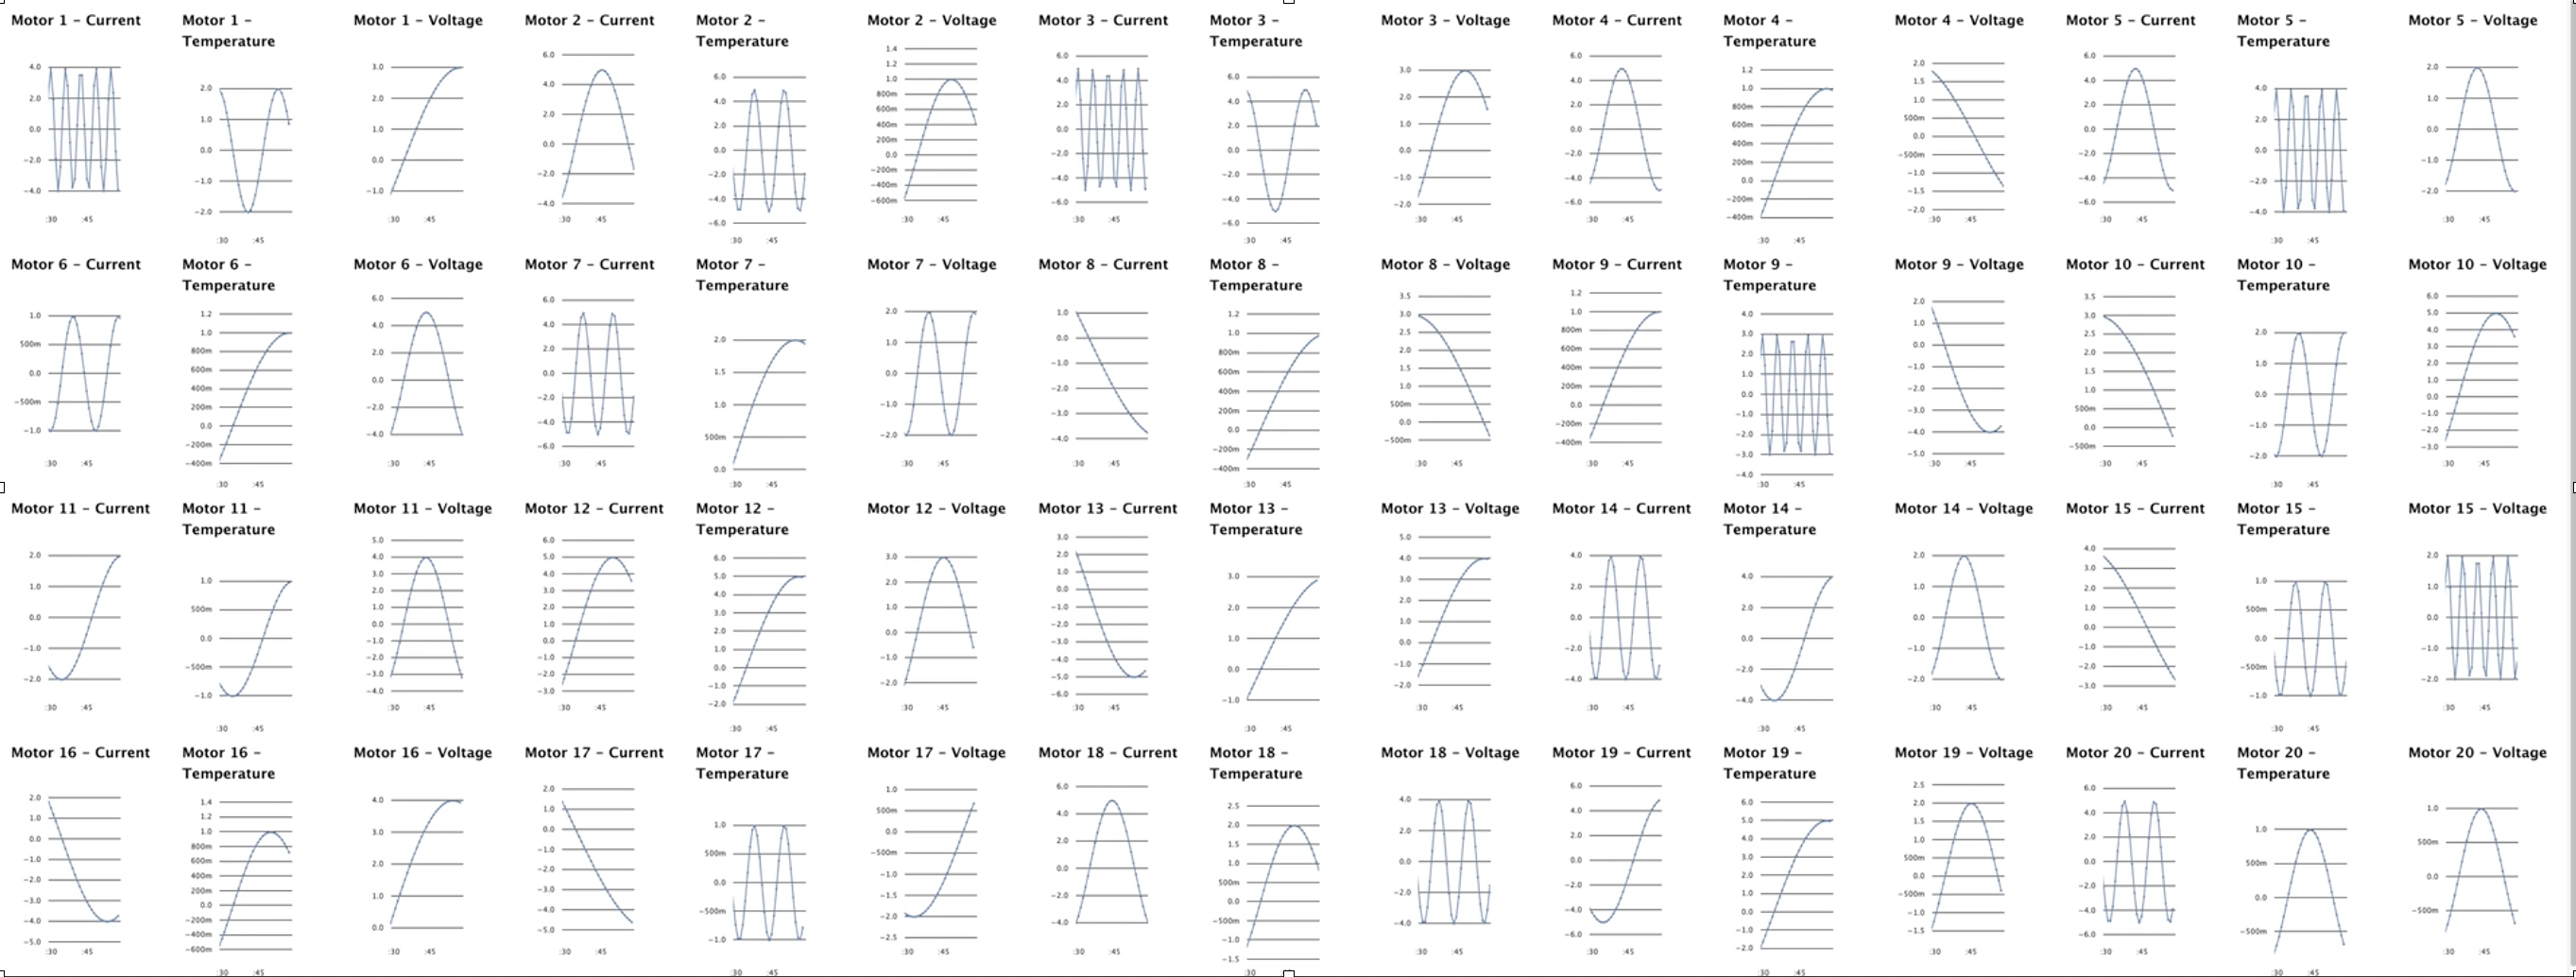 sixty charts rendered on a single page